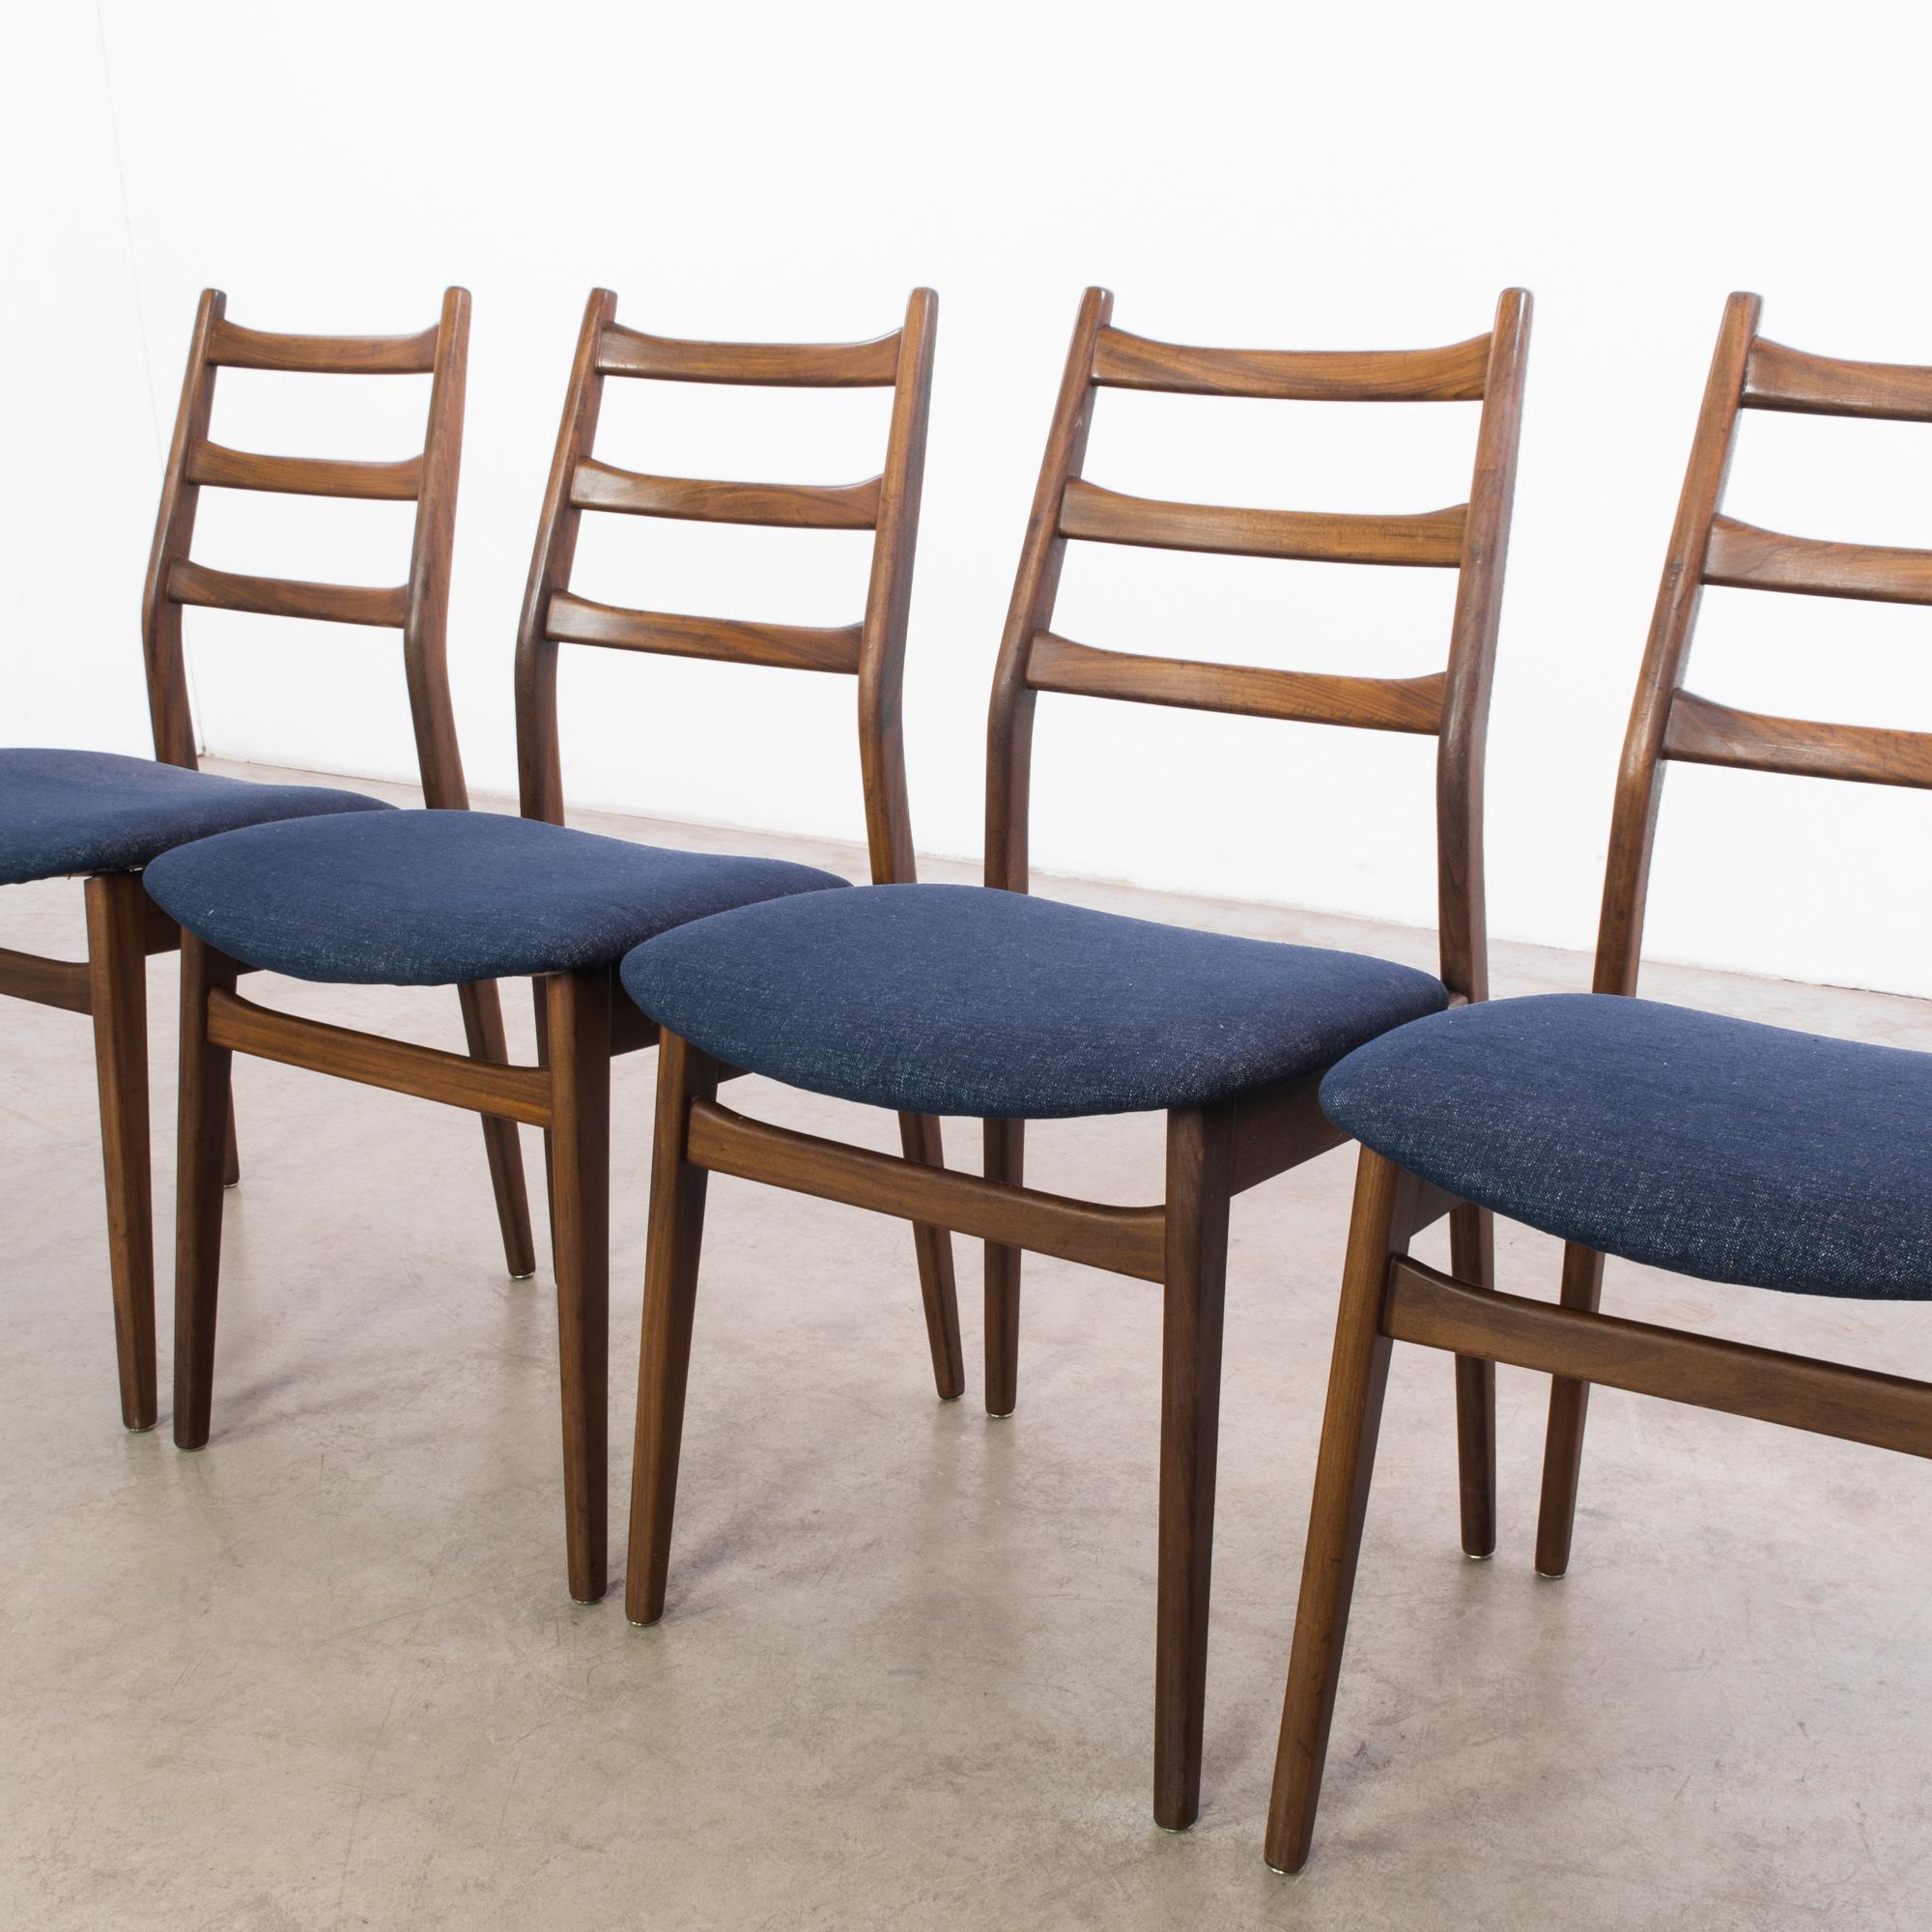 1960s Danish Wooden Chairs with Upholstered Seats, Set of 4 2